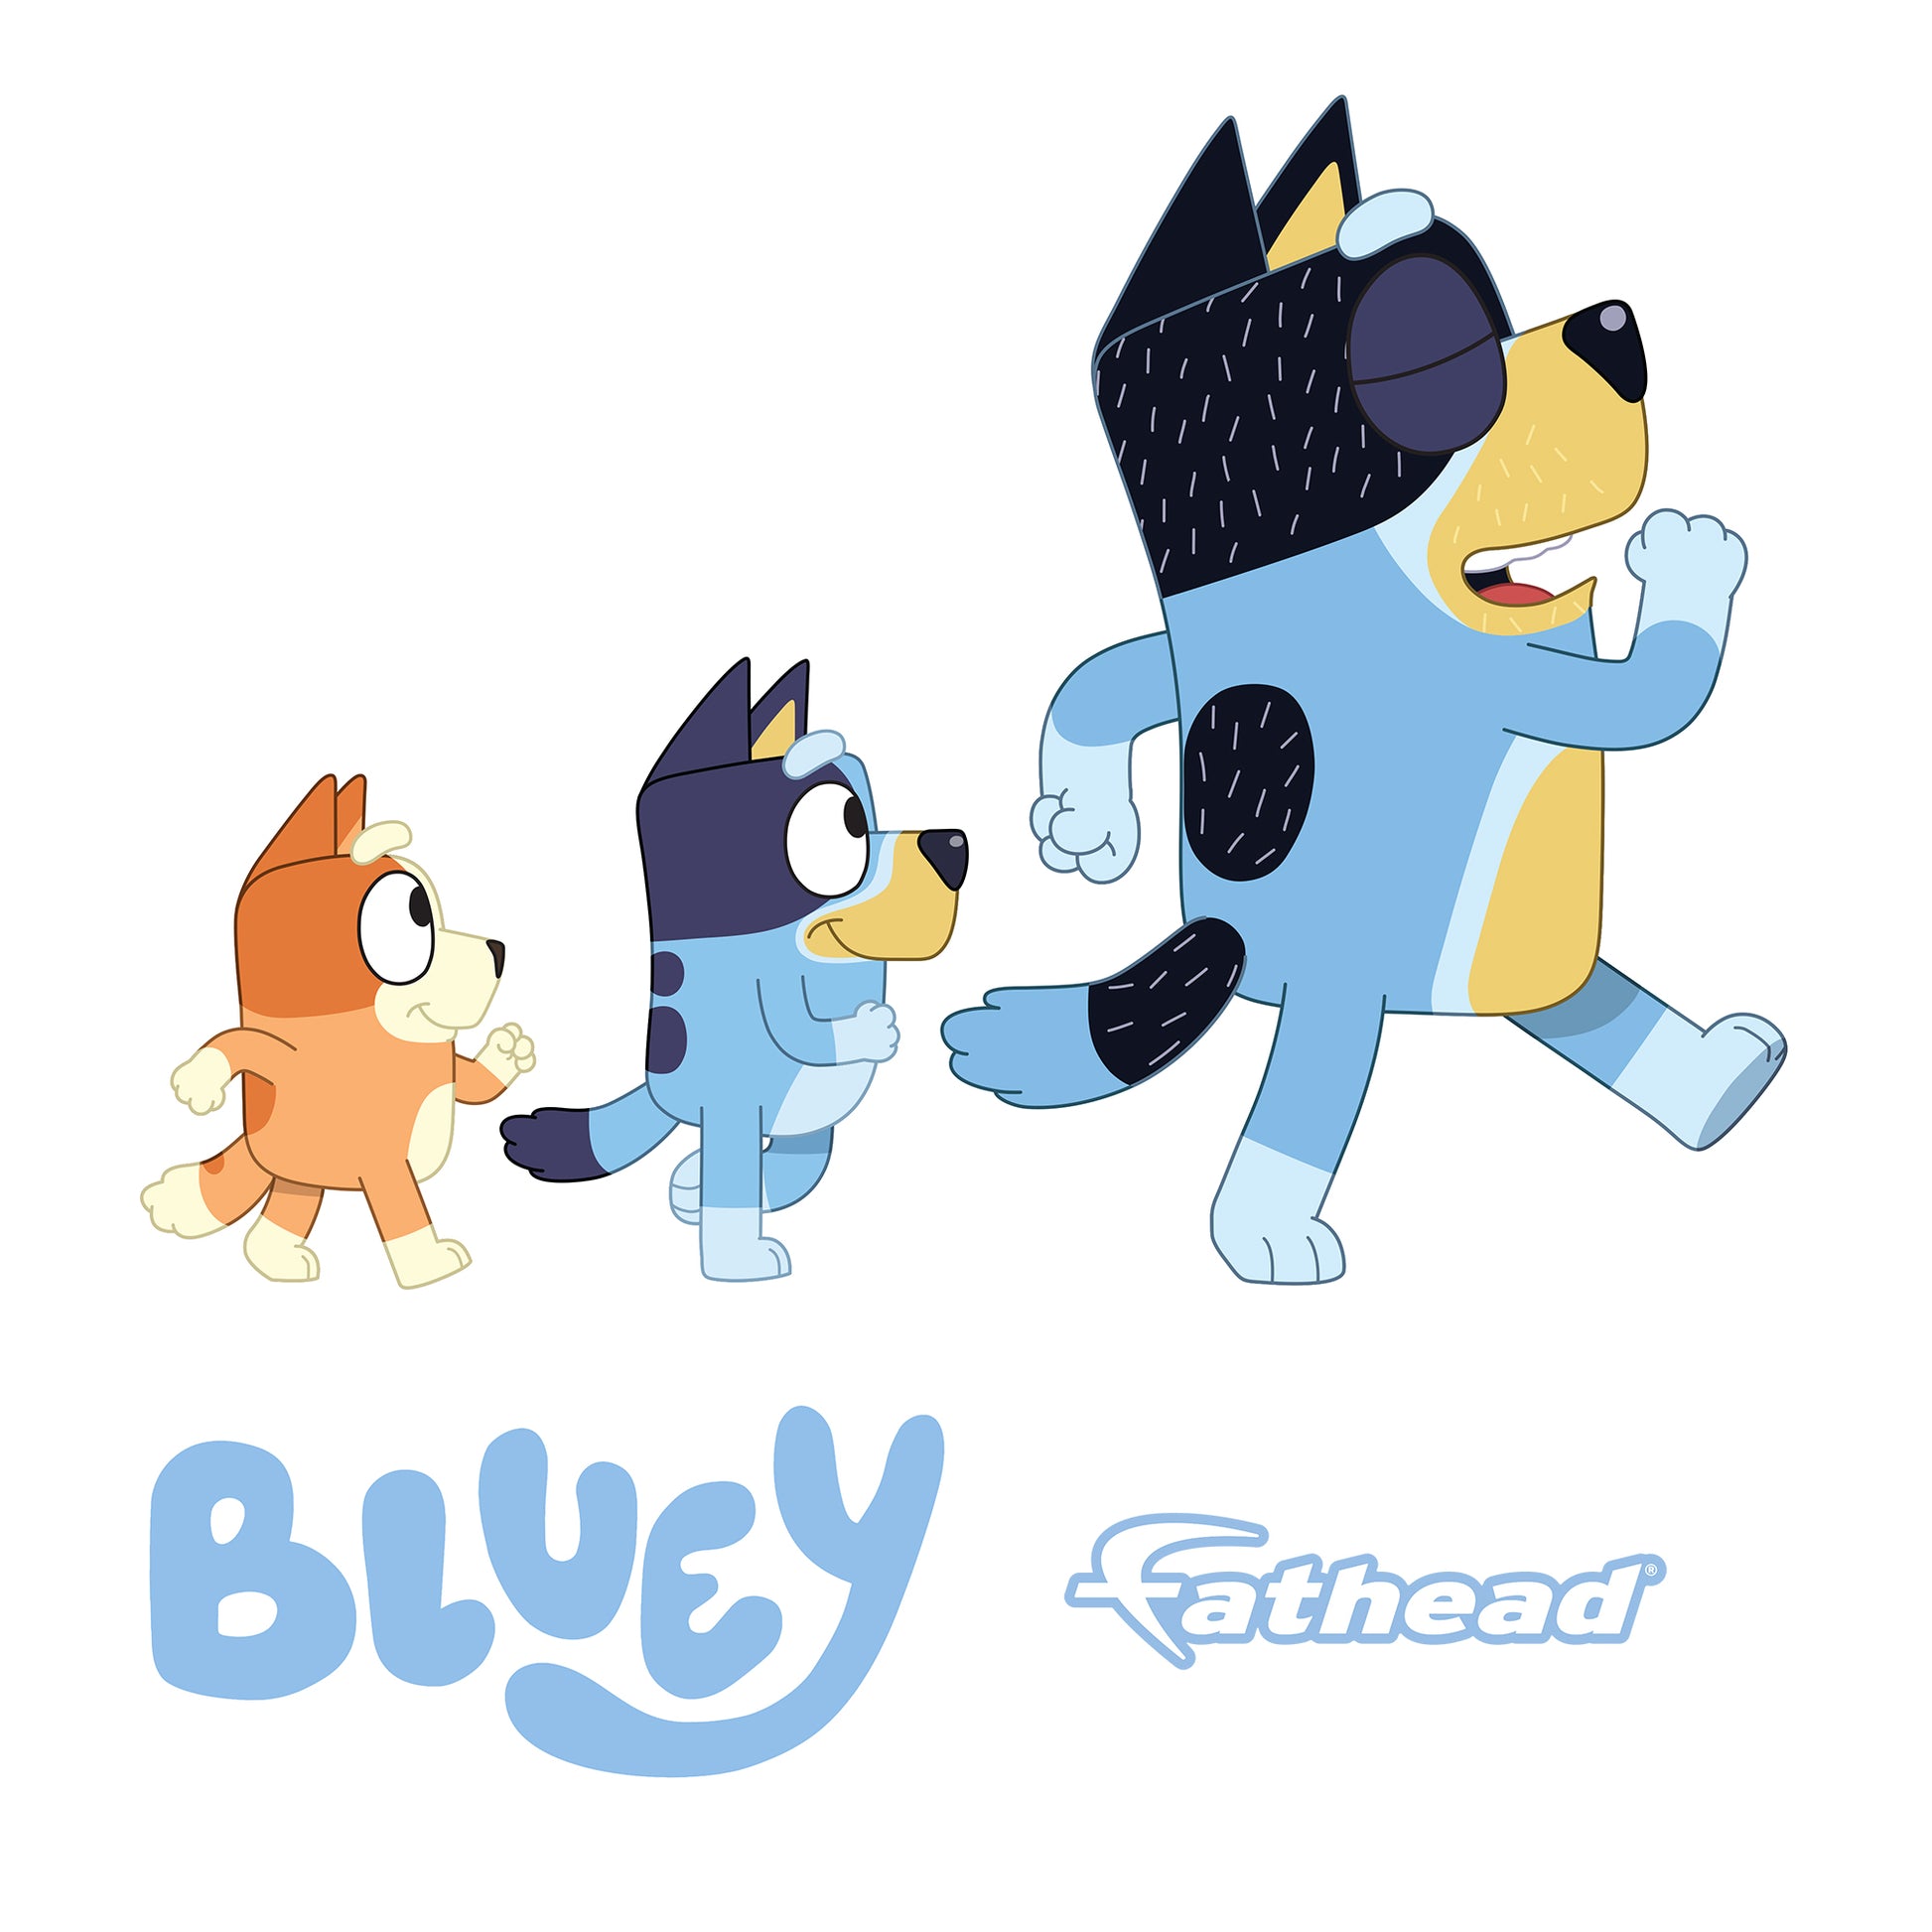 Personalised Bluey Products - Bluey Official Website